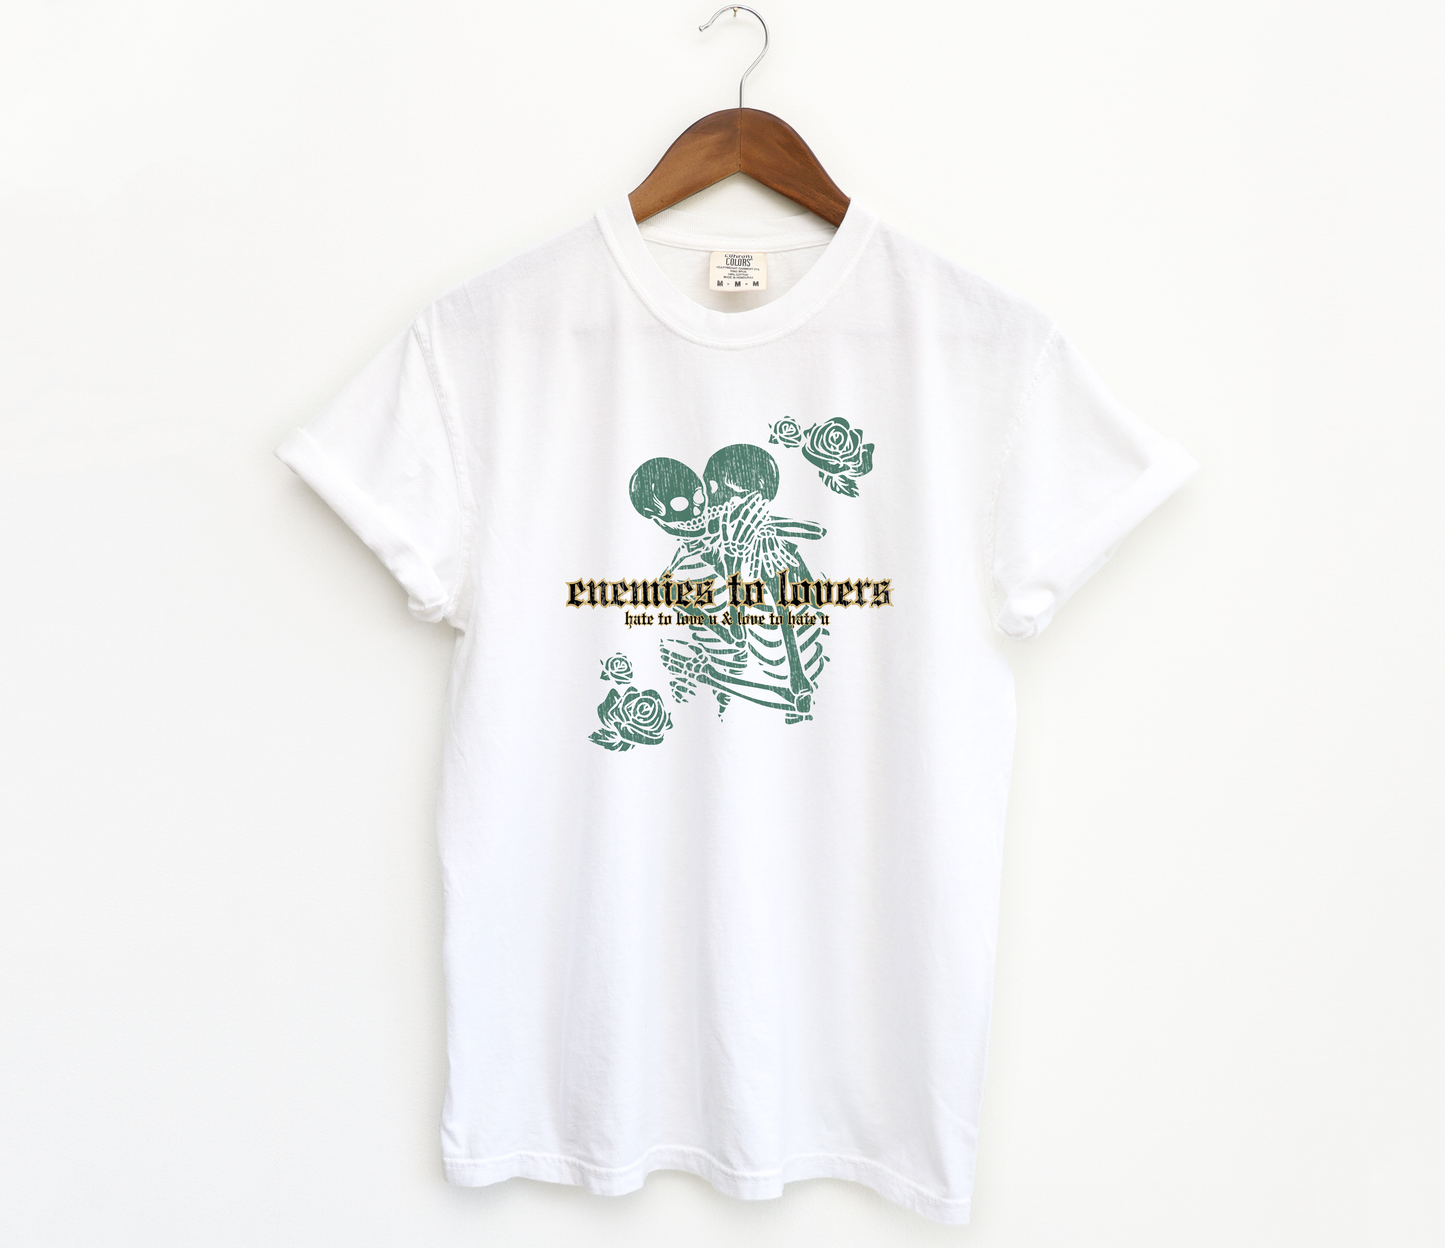 enemies to lovers t-shirt in white